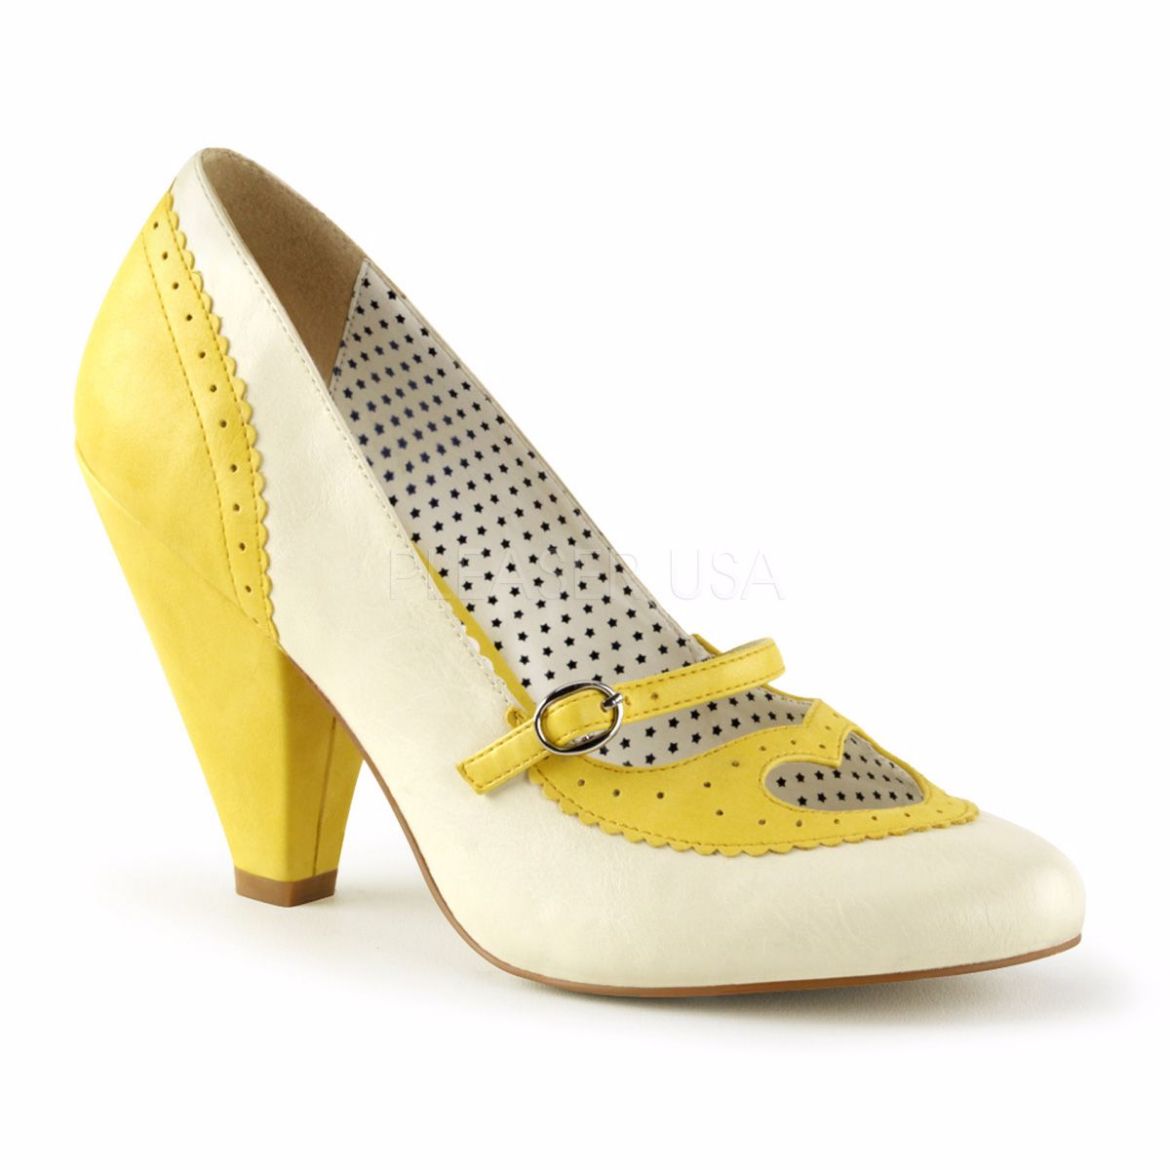 Product image of Pin Up Couture Poppy-18 Yellow-Cream Faux Leather, 3 3/4 inch (9.5 cm) Cone Heel Court Pump Shoes